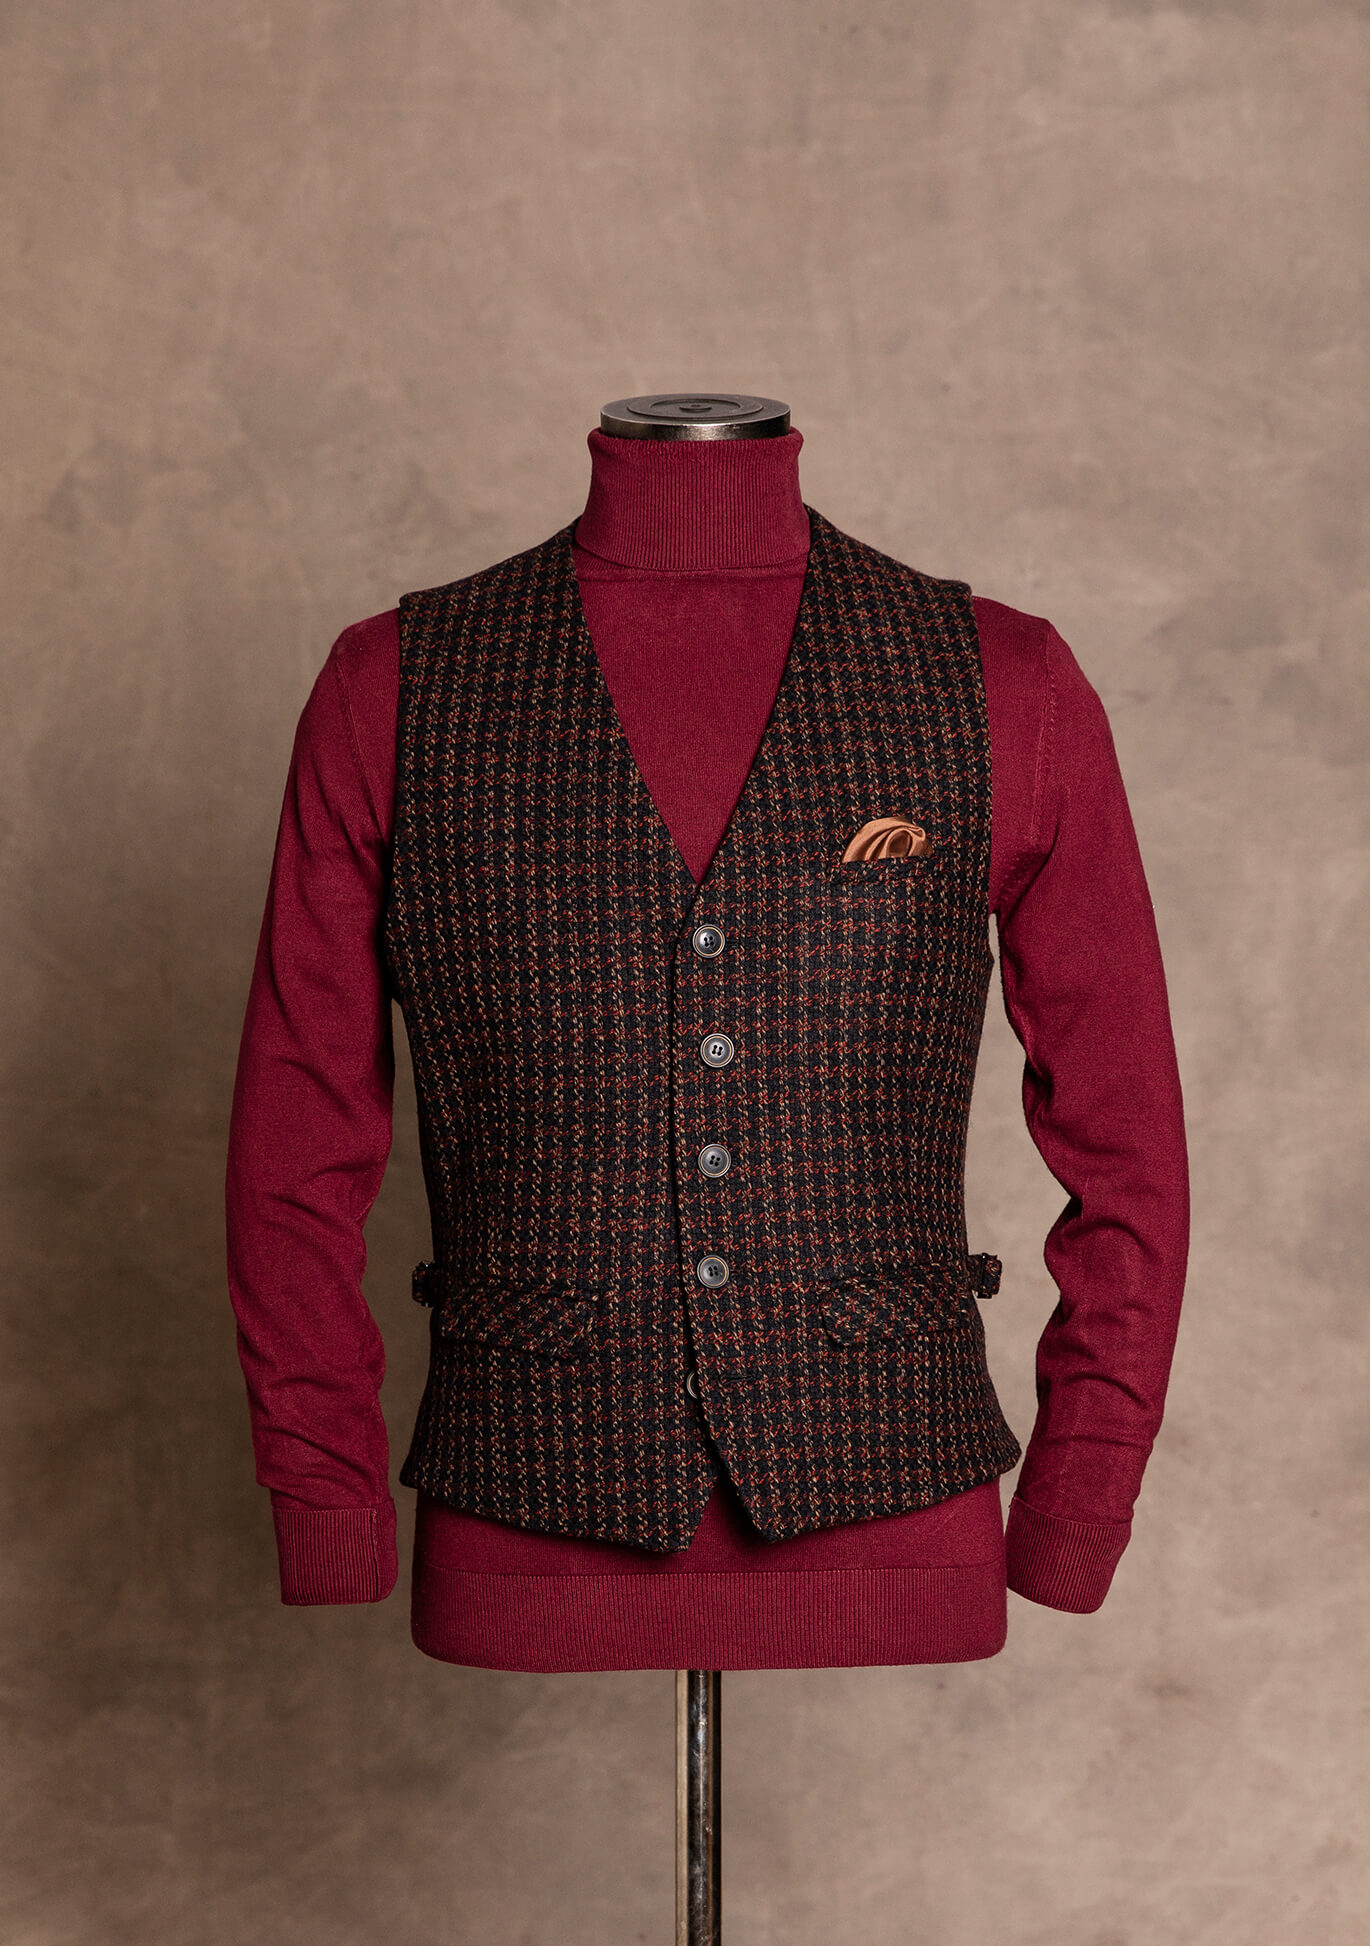 Stylish and casual premium men's vest gilet by DORNSCHILD Black, dark red patterned with copper elements made of the finest Italian fabric for a distinctive style and perfect for any occasion.